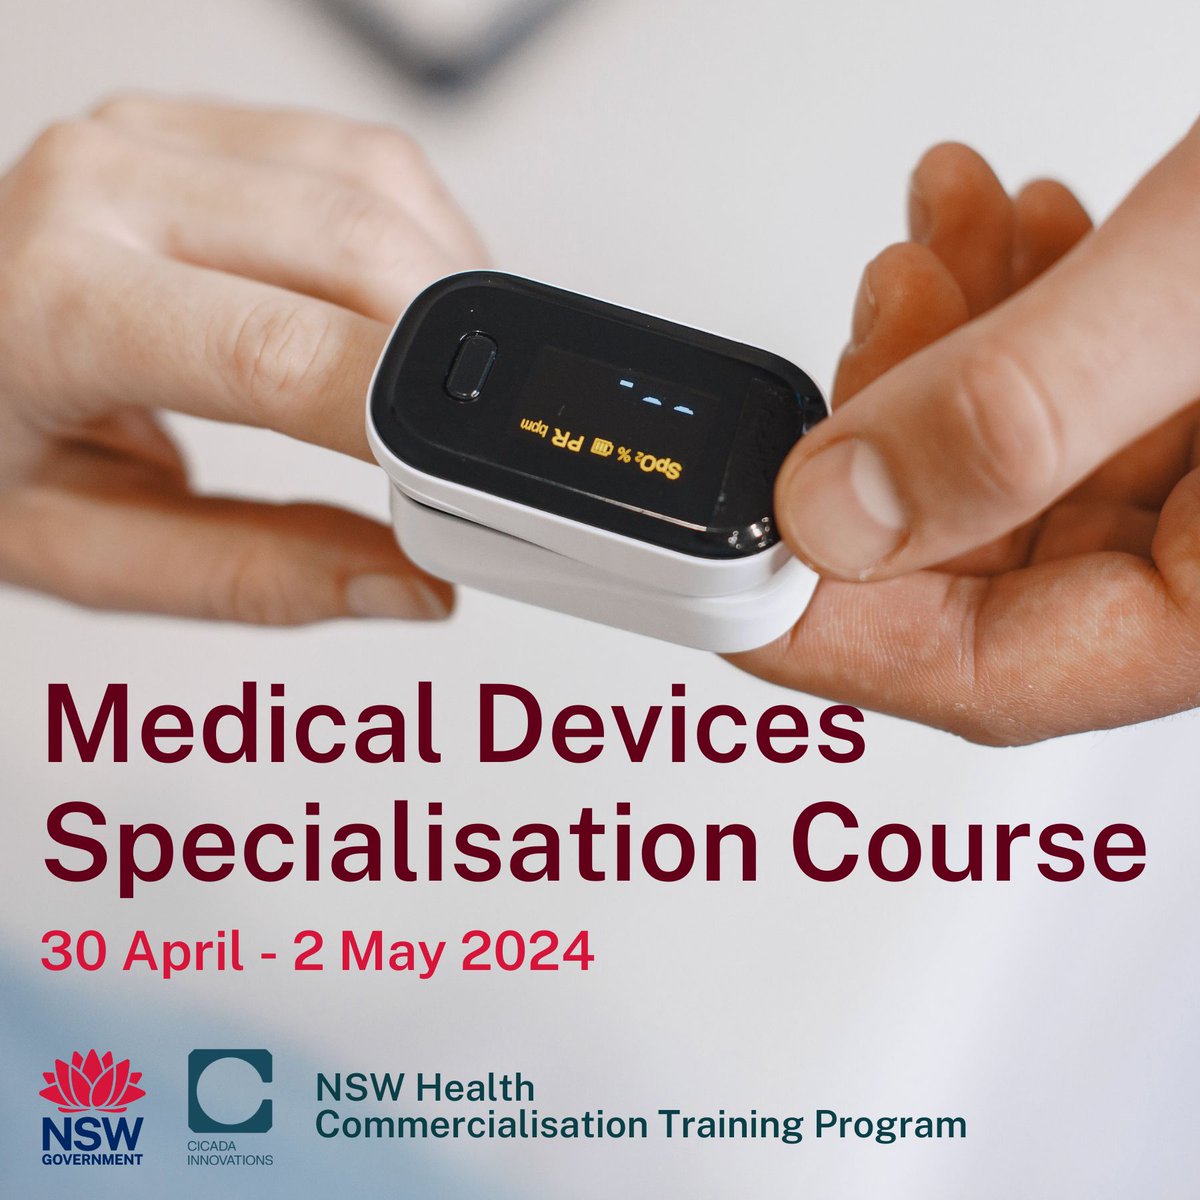 Are you ready to take your medical device from concept to market? Apply to our Medical Devices Specialisation Course, part of the @NSWHealth Commercialisation Training Program: cicadainnovations.com/programs/ctp-s… Delivered in partnership w/ @Mark_C_Flynn & @CicadaInnov